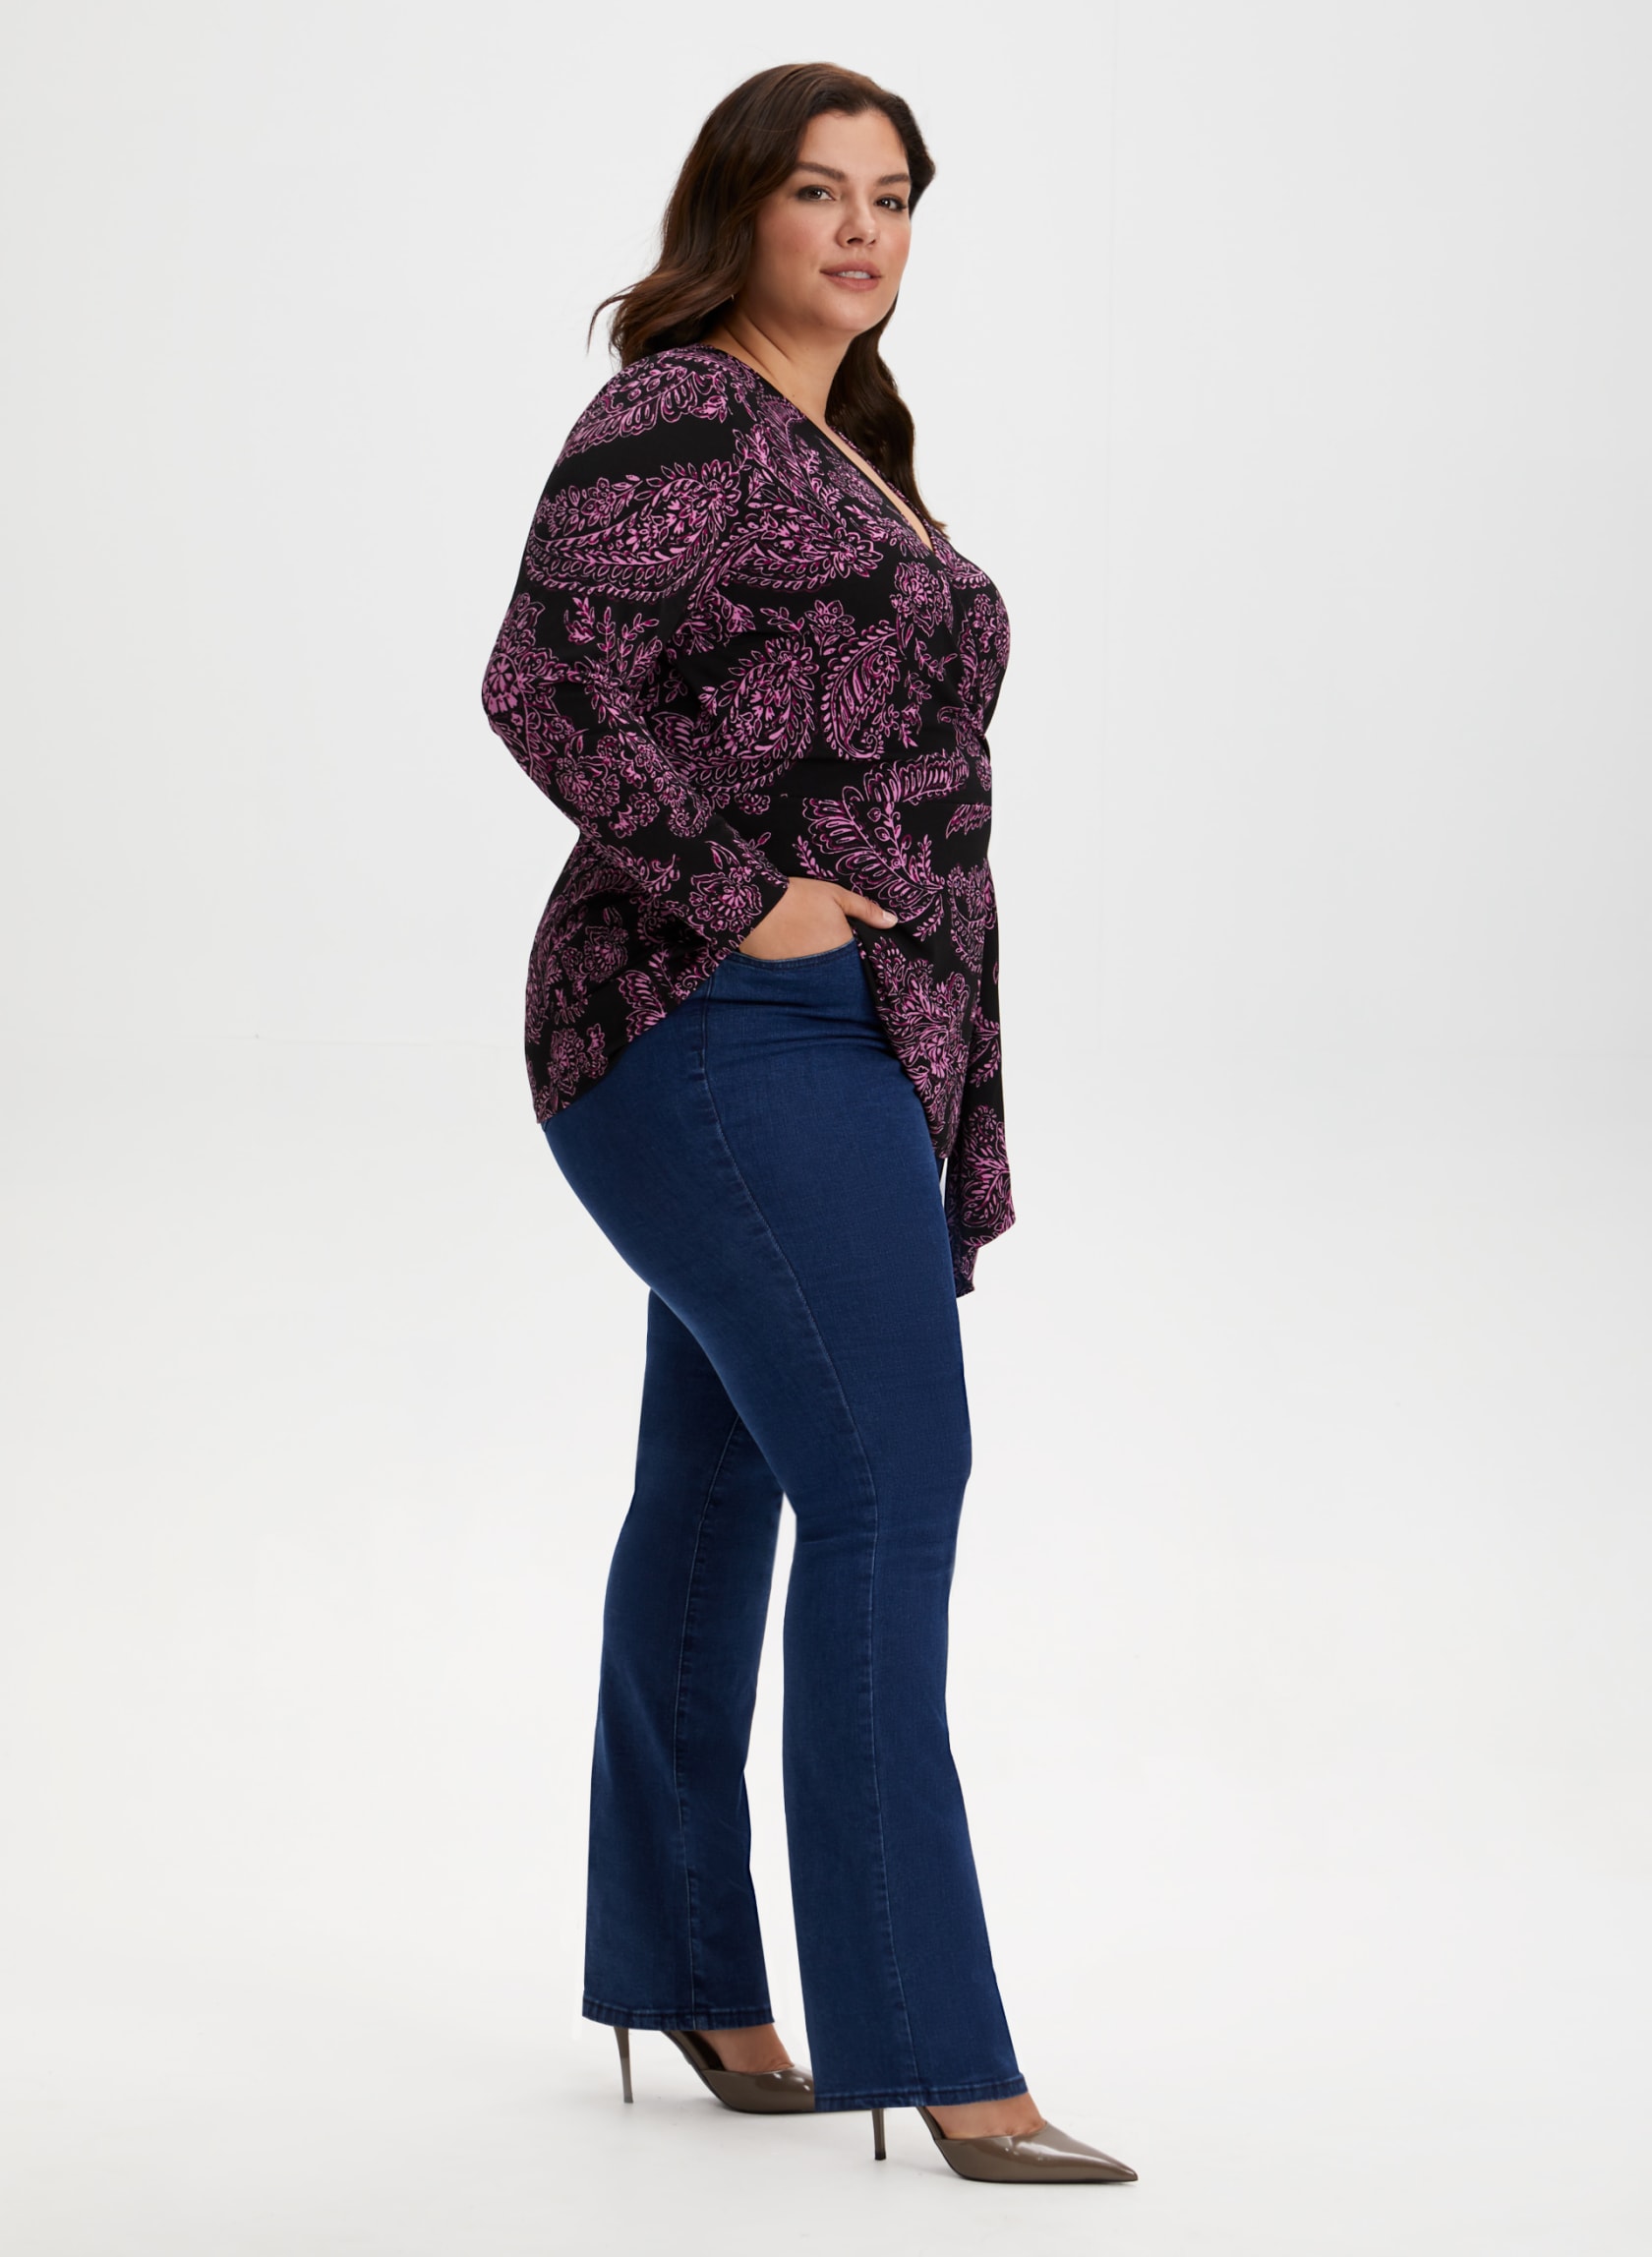 dyd At lyve Hollywood Laura Women's Plus Size Clothing | Laura